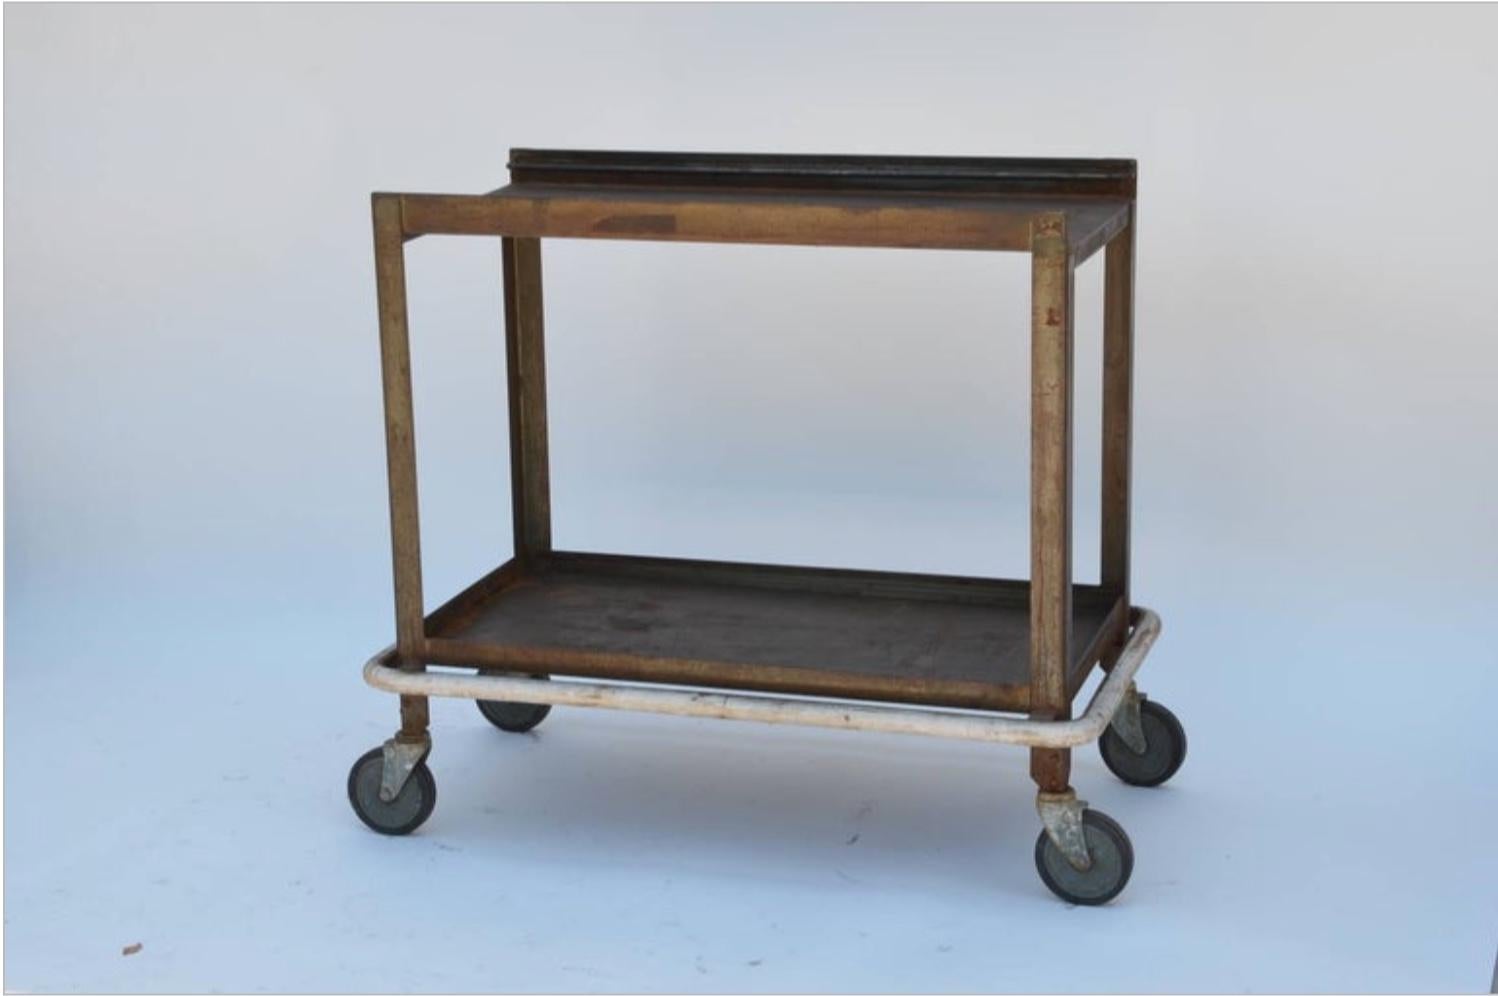 Sturdy industrial bar cart on wheels. Also great as an industrial console in the kitchen or anywhere else in the house.